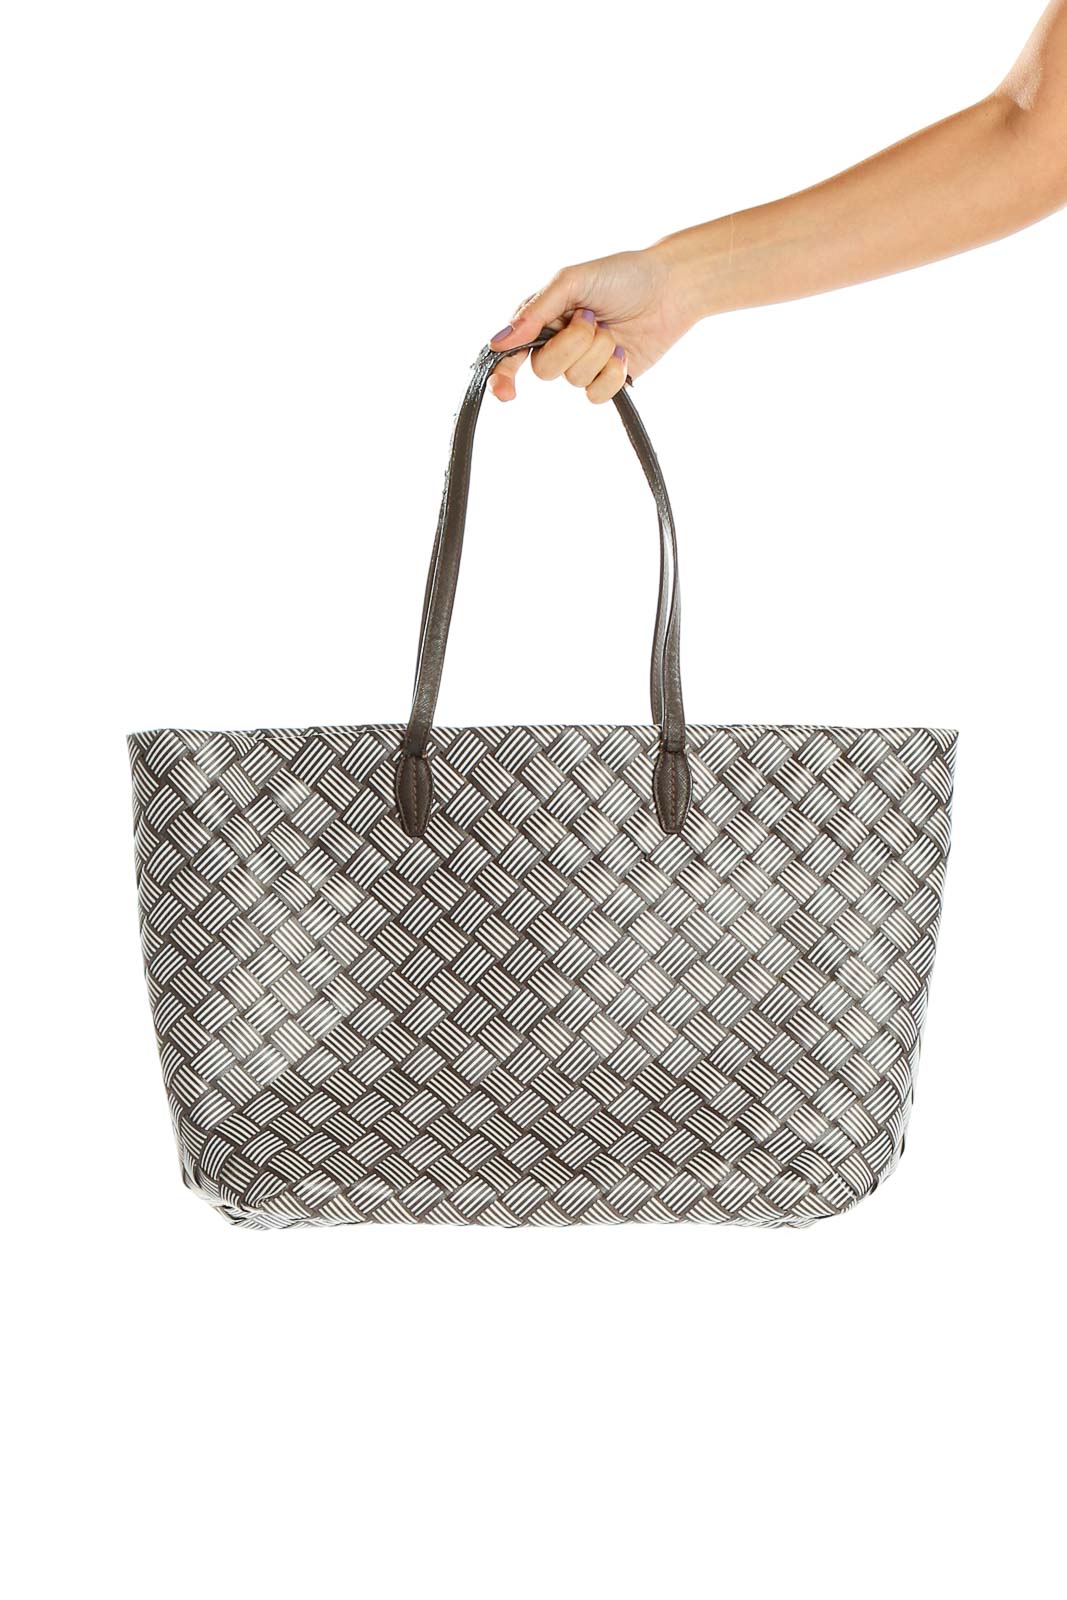 Gray Woven Tote Bag Front